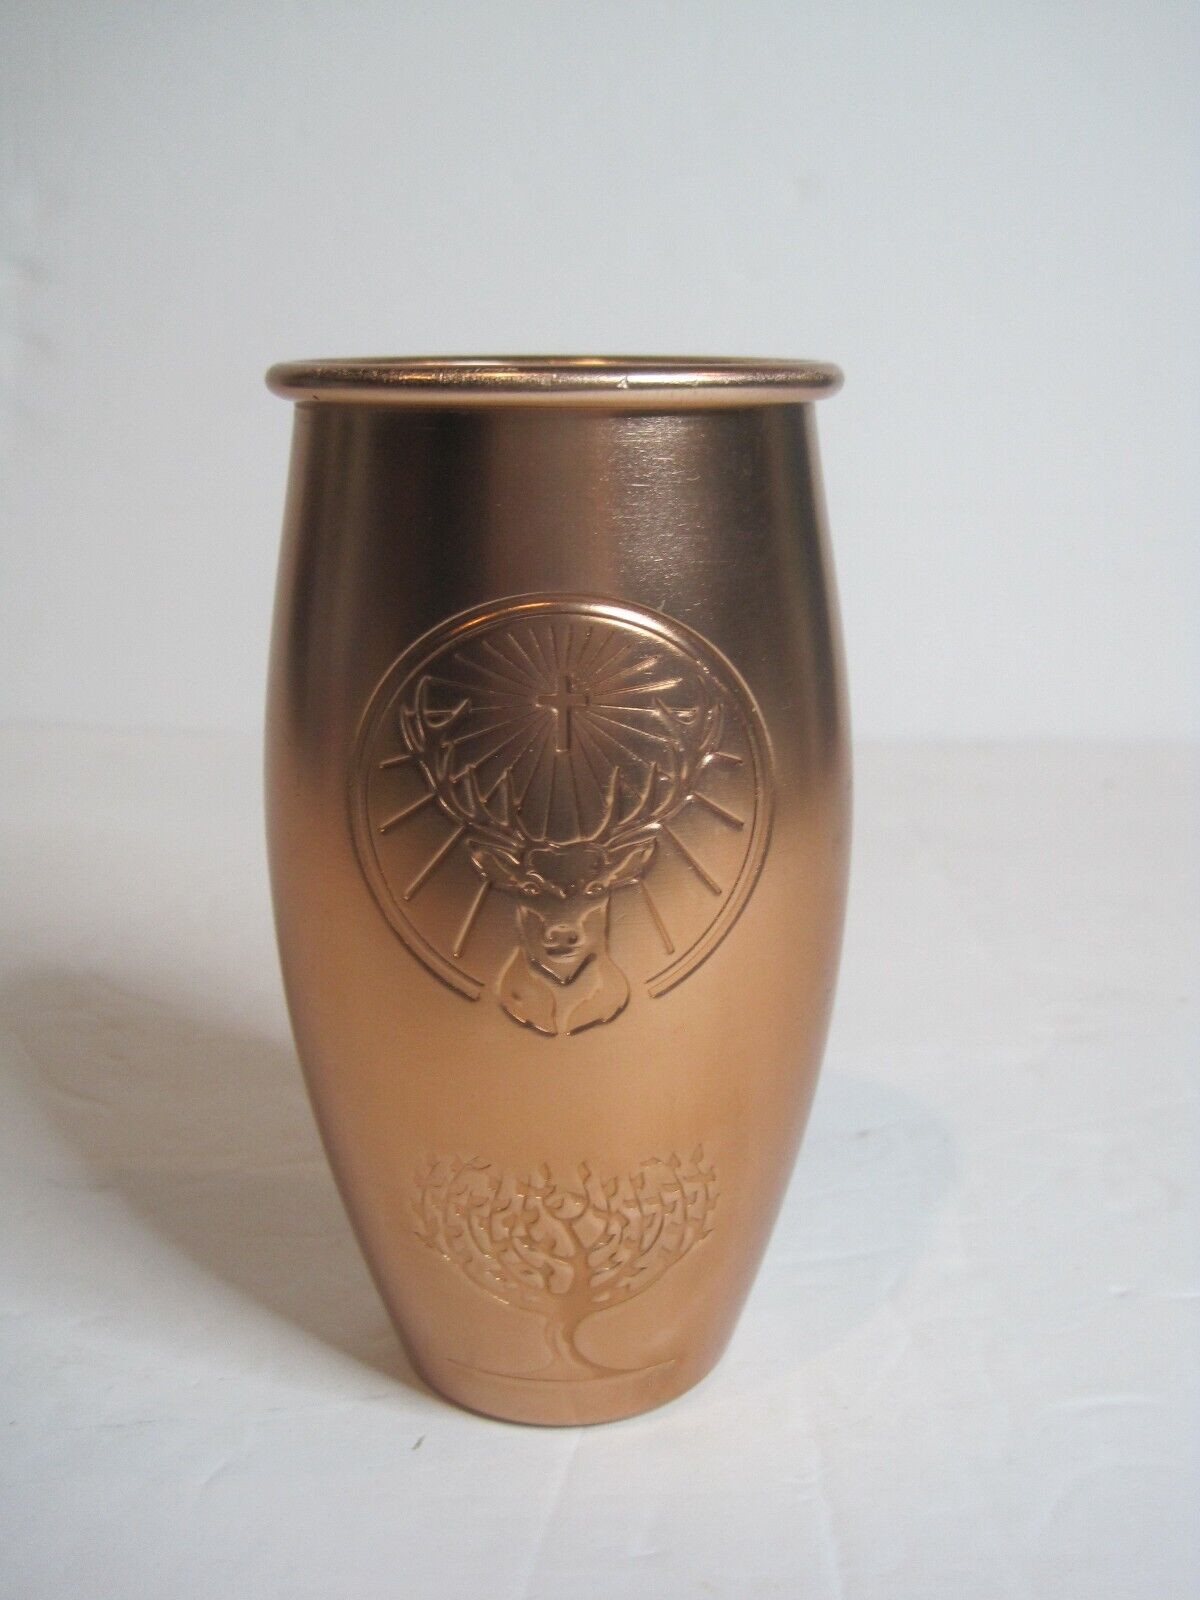 NEW Jagermeister Berlin Moscow Mule Copper Cup Copper 12 oz. 